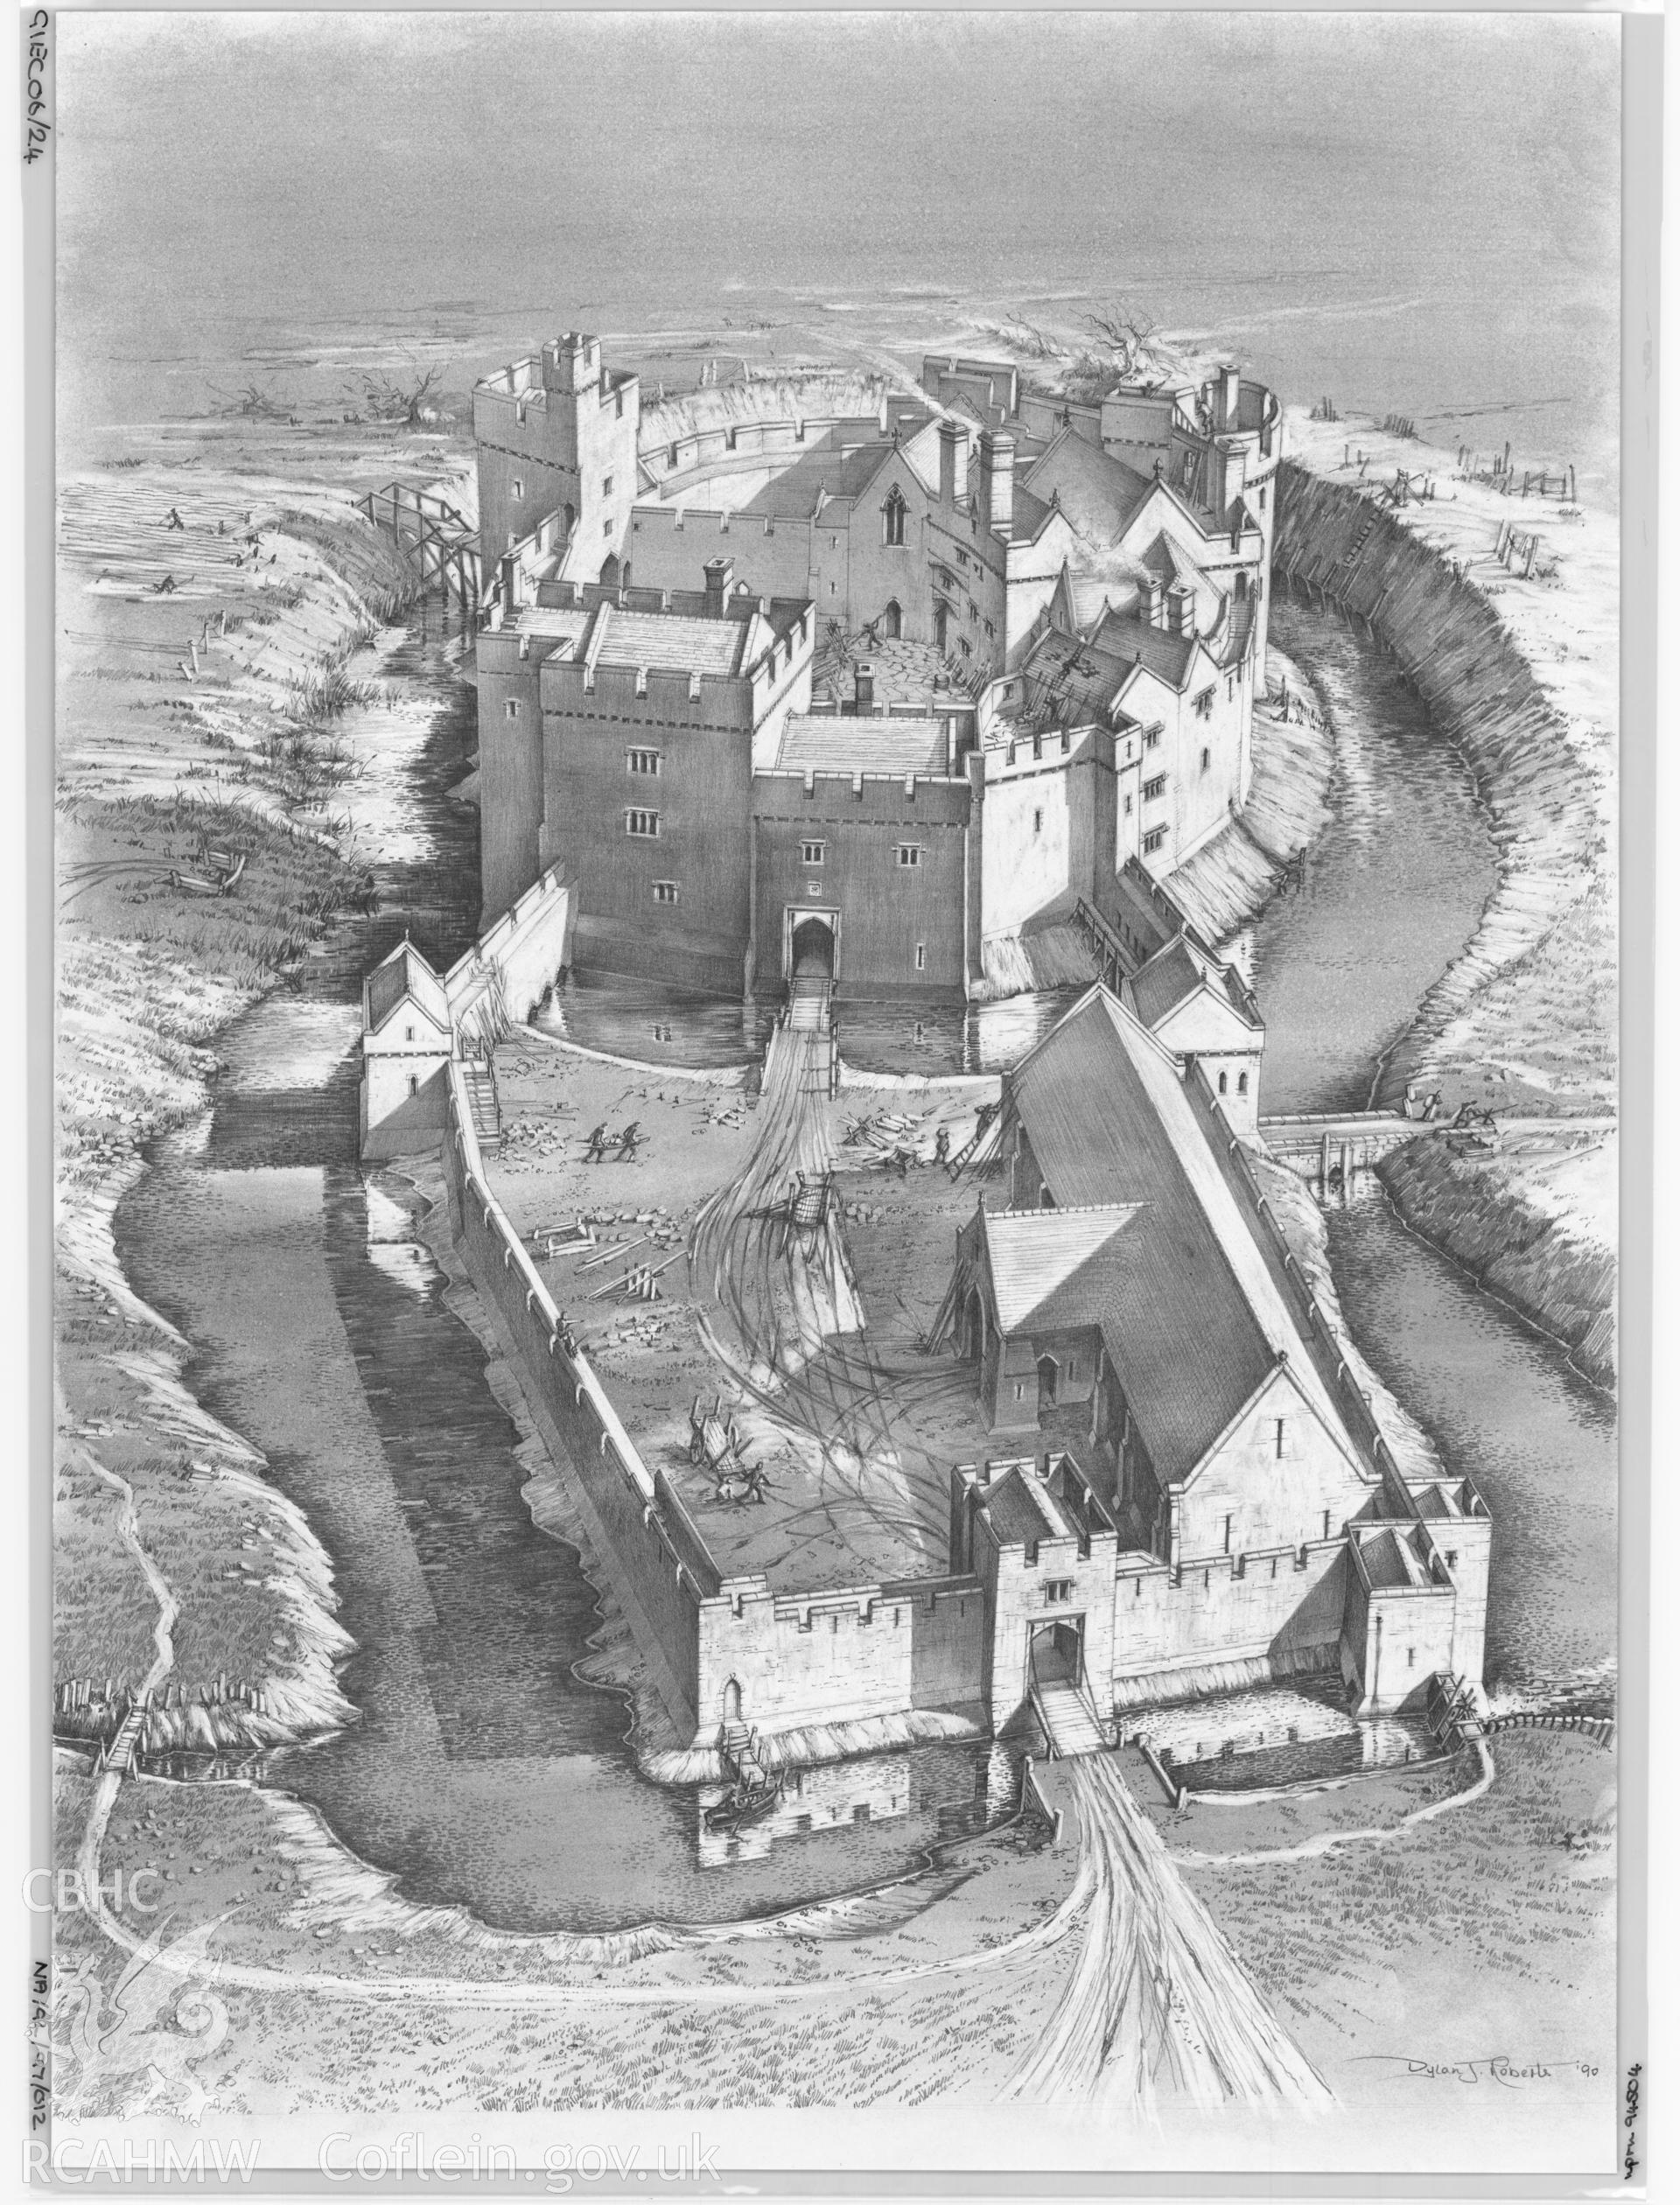 Coity Castle, Glamorgan; reconstruction drawing by Dylan Roberts, showing the castle as refurbished in the sixteenth century, as published in RCAHMW Inventory of the Ancient Monuments in Glamorgan Volume III - Part 1a Medieval Secular Monuments The Early Castles From the Norman Conquest to 1217, 1991, figure 148, page 221.